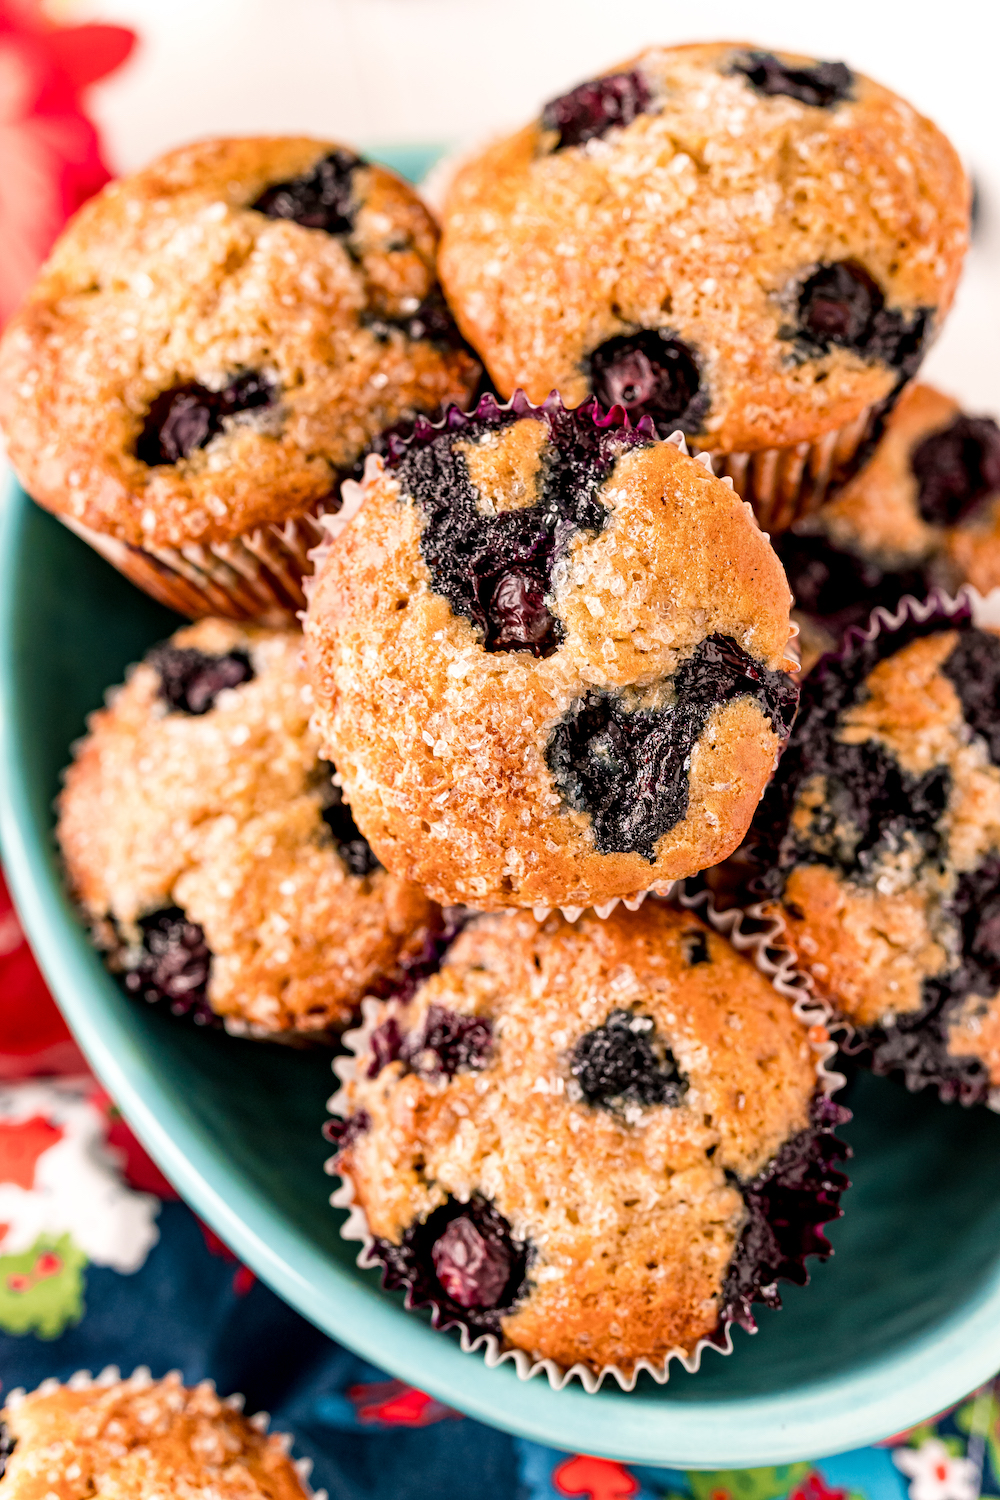 The Best Homemade Blueberry Muffins